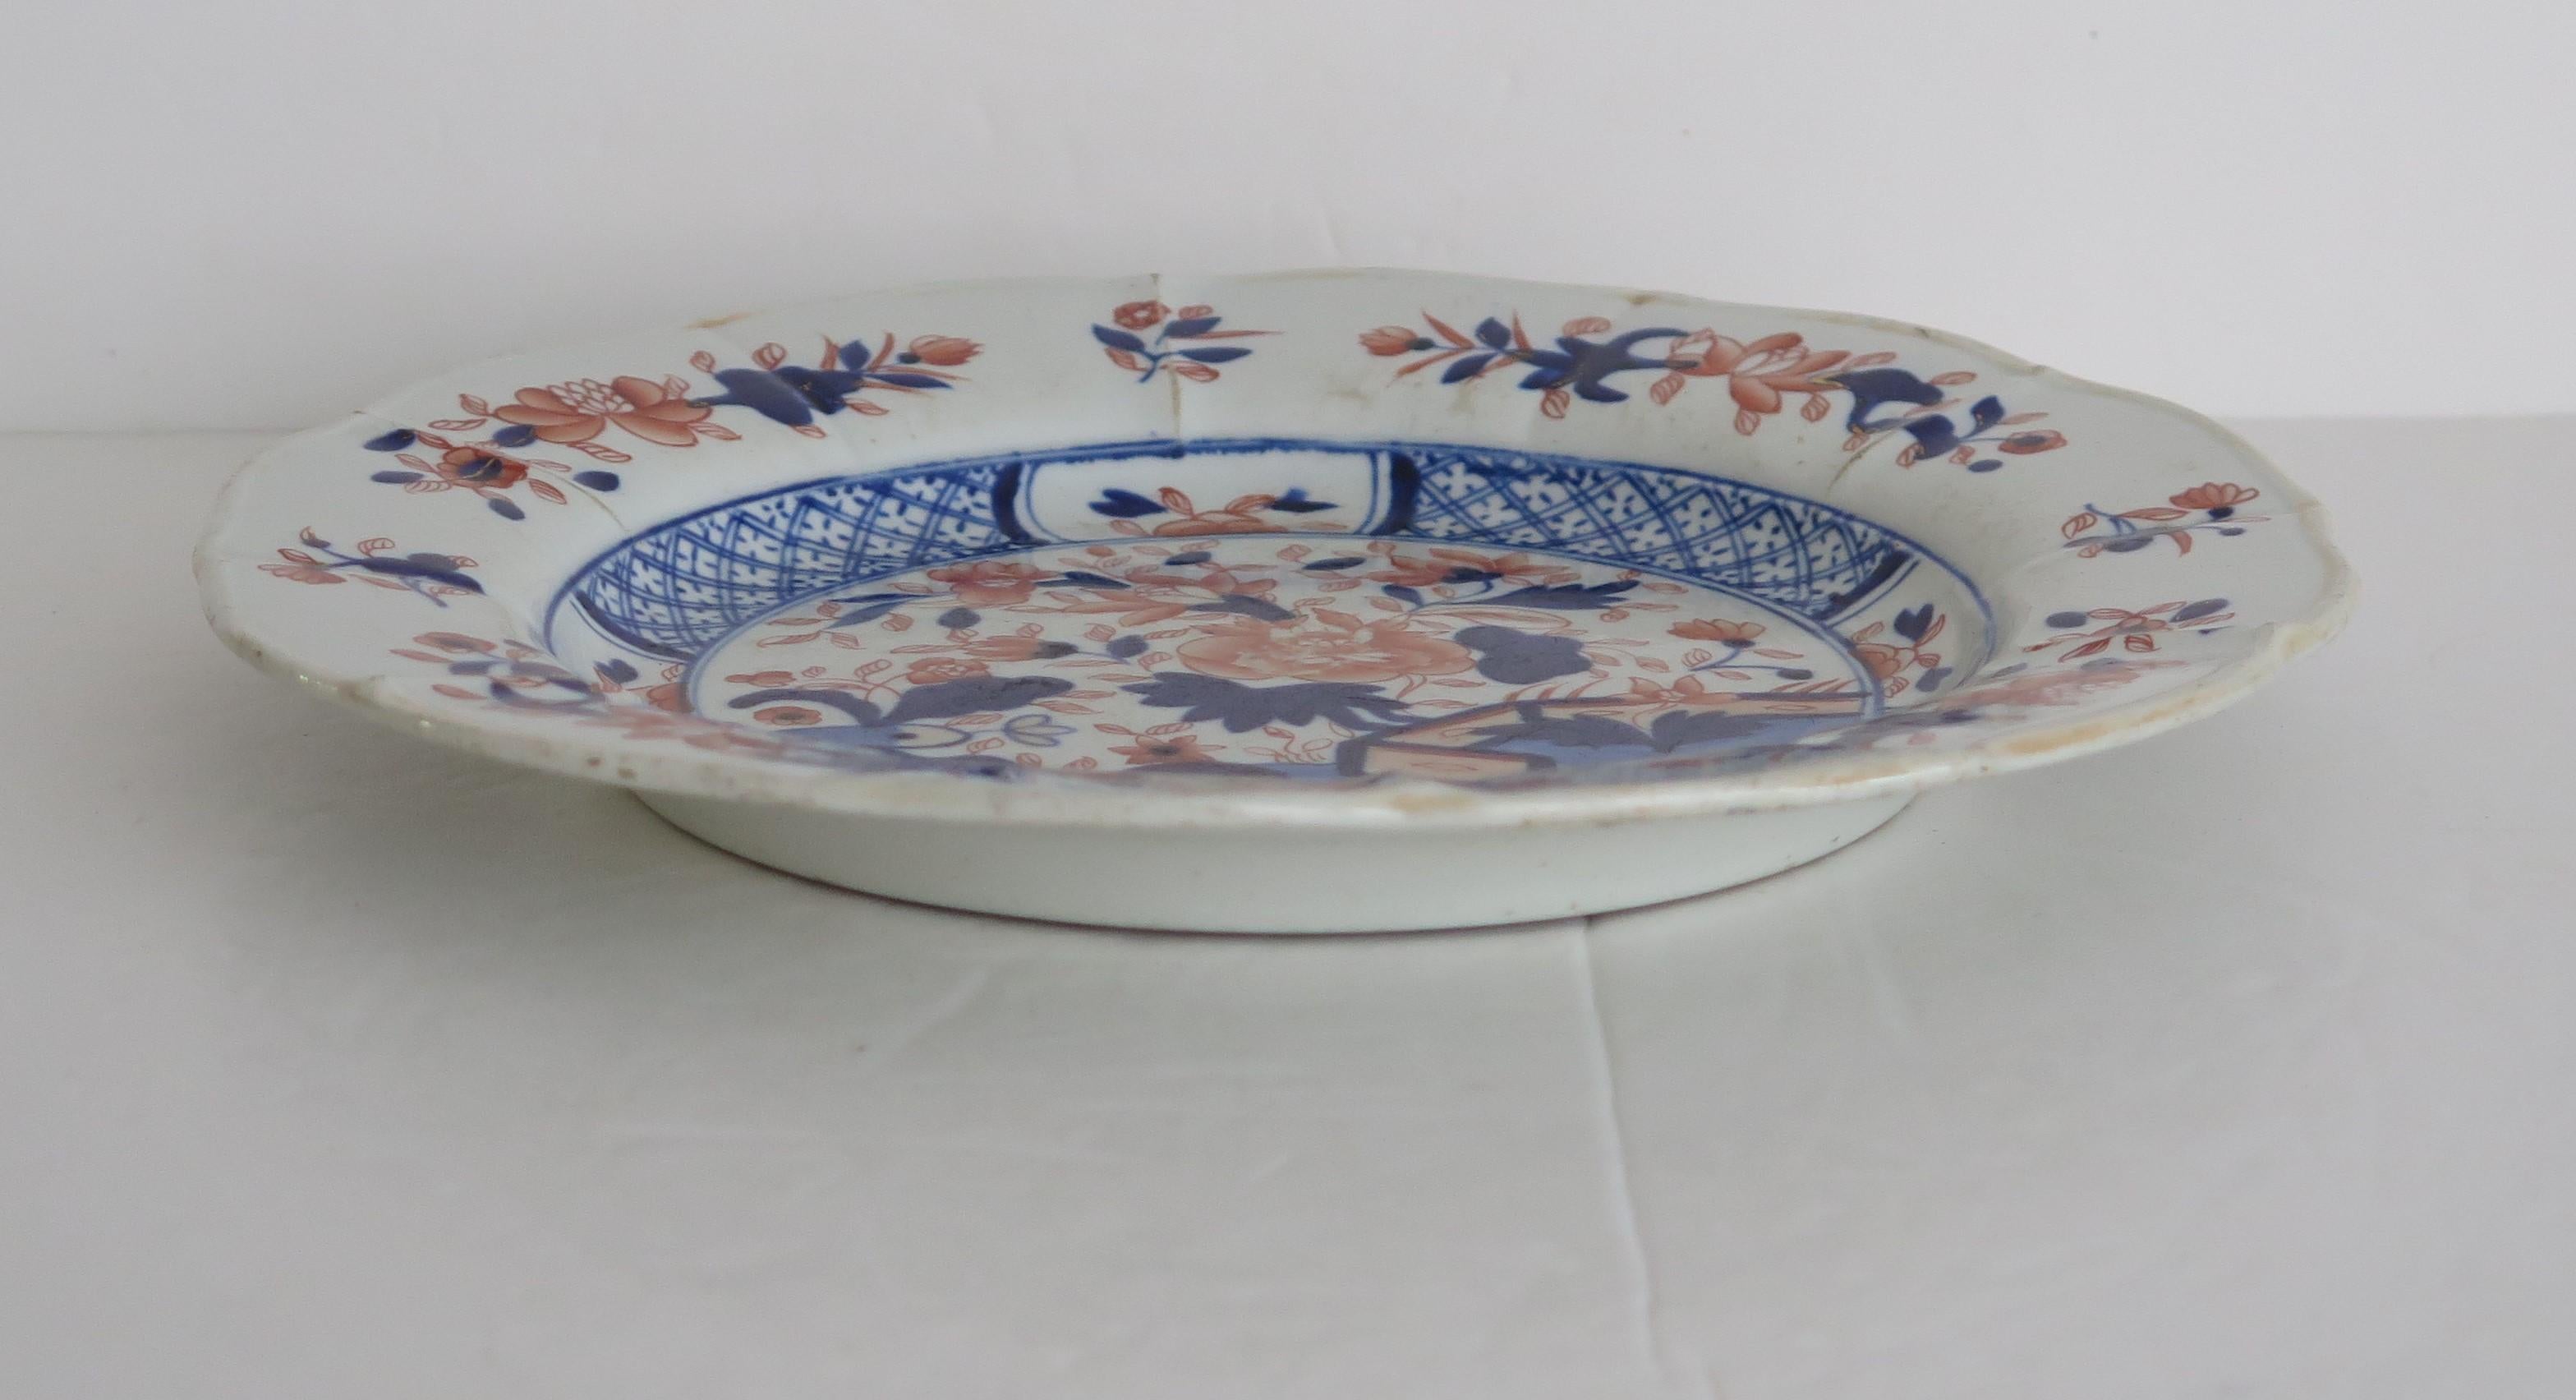 Chinoiserie Early Mason's Ironstone Desert Plate or Dish in Fence Japan Pattern, circa 1818